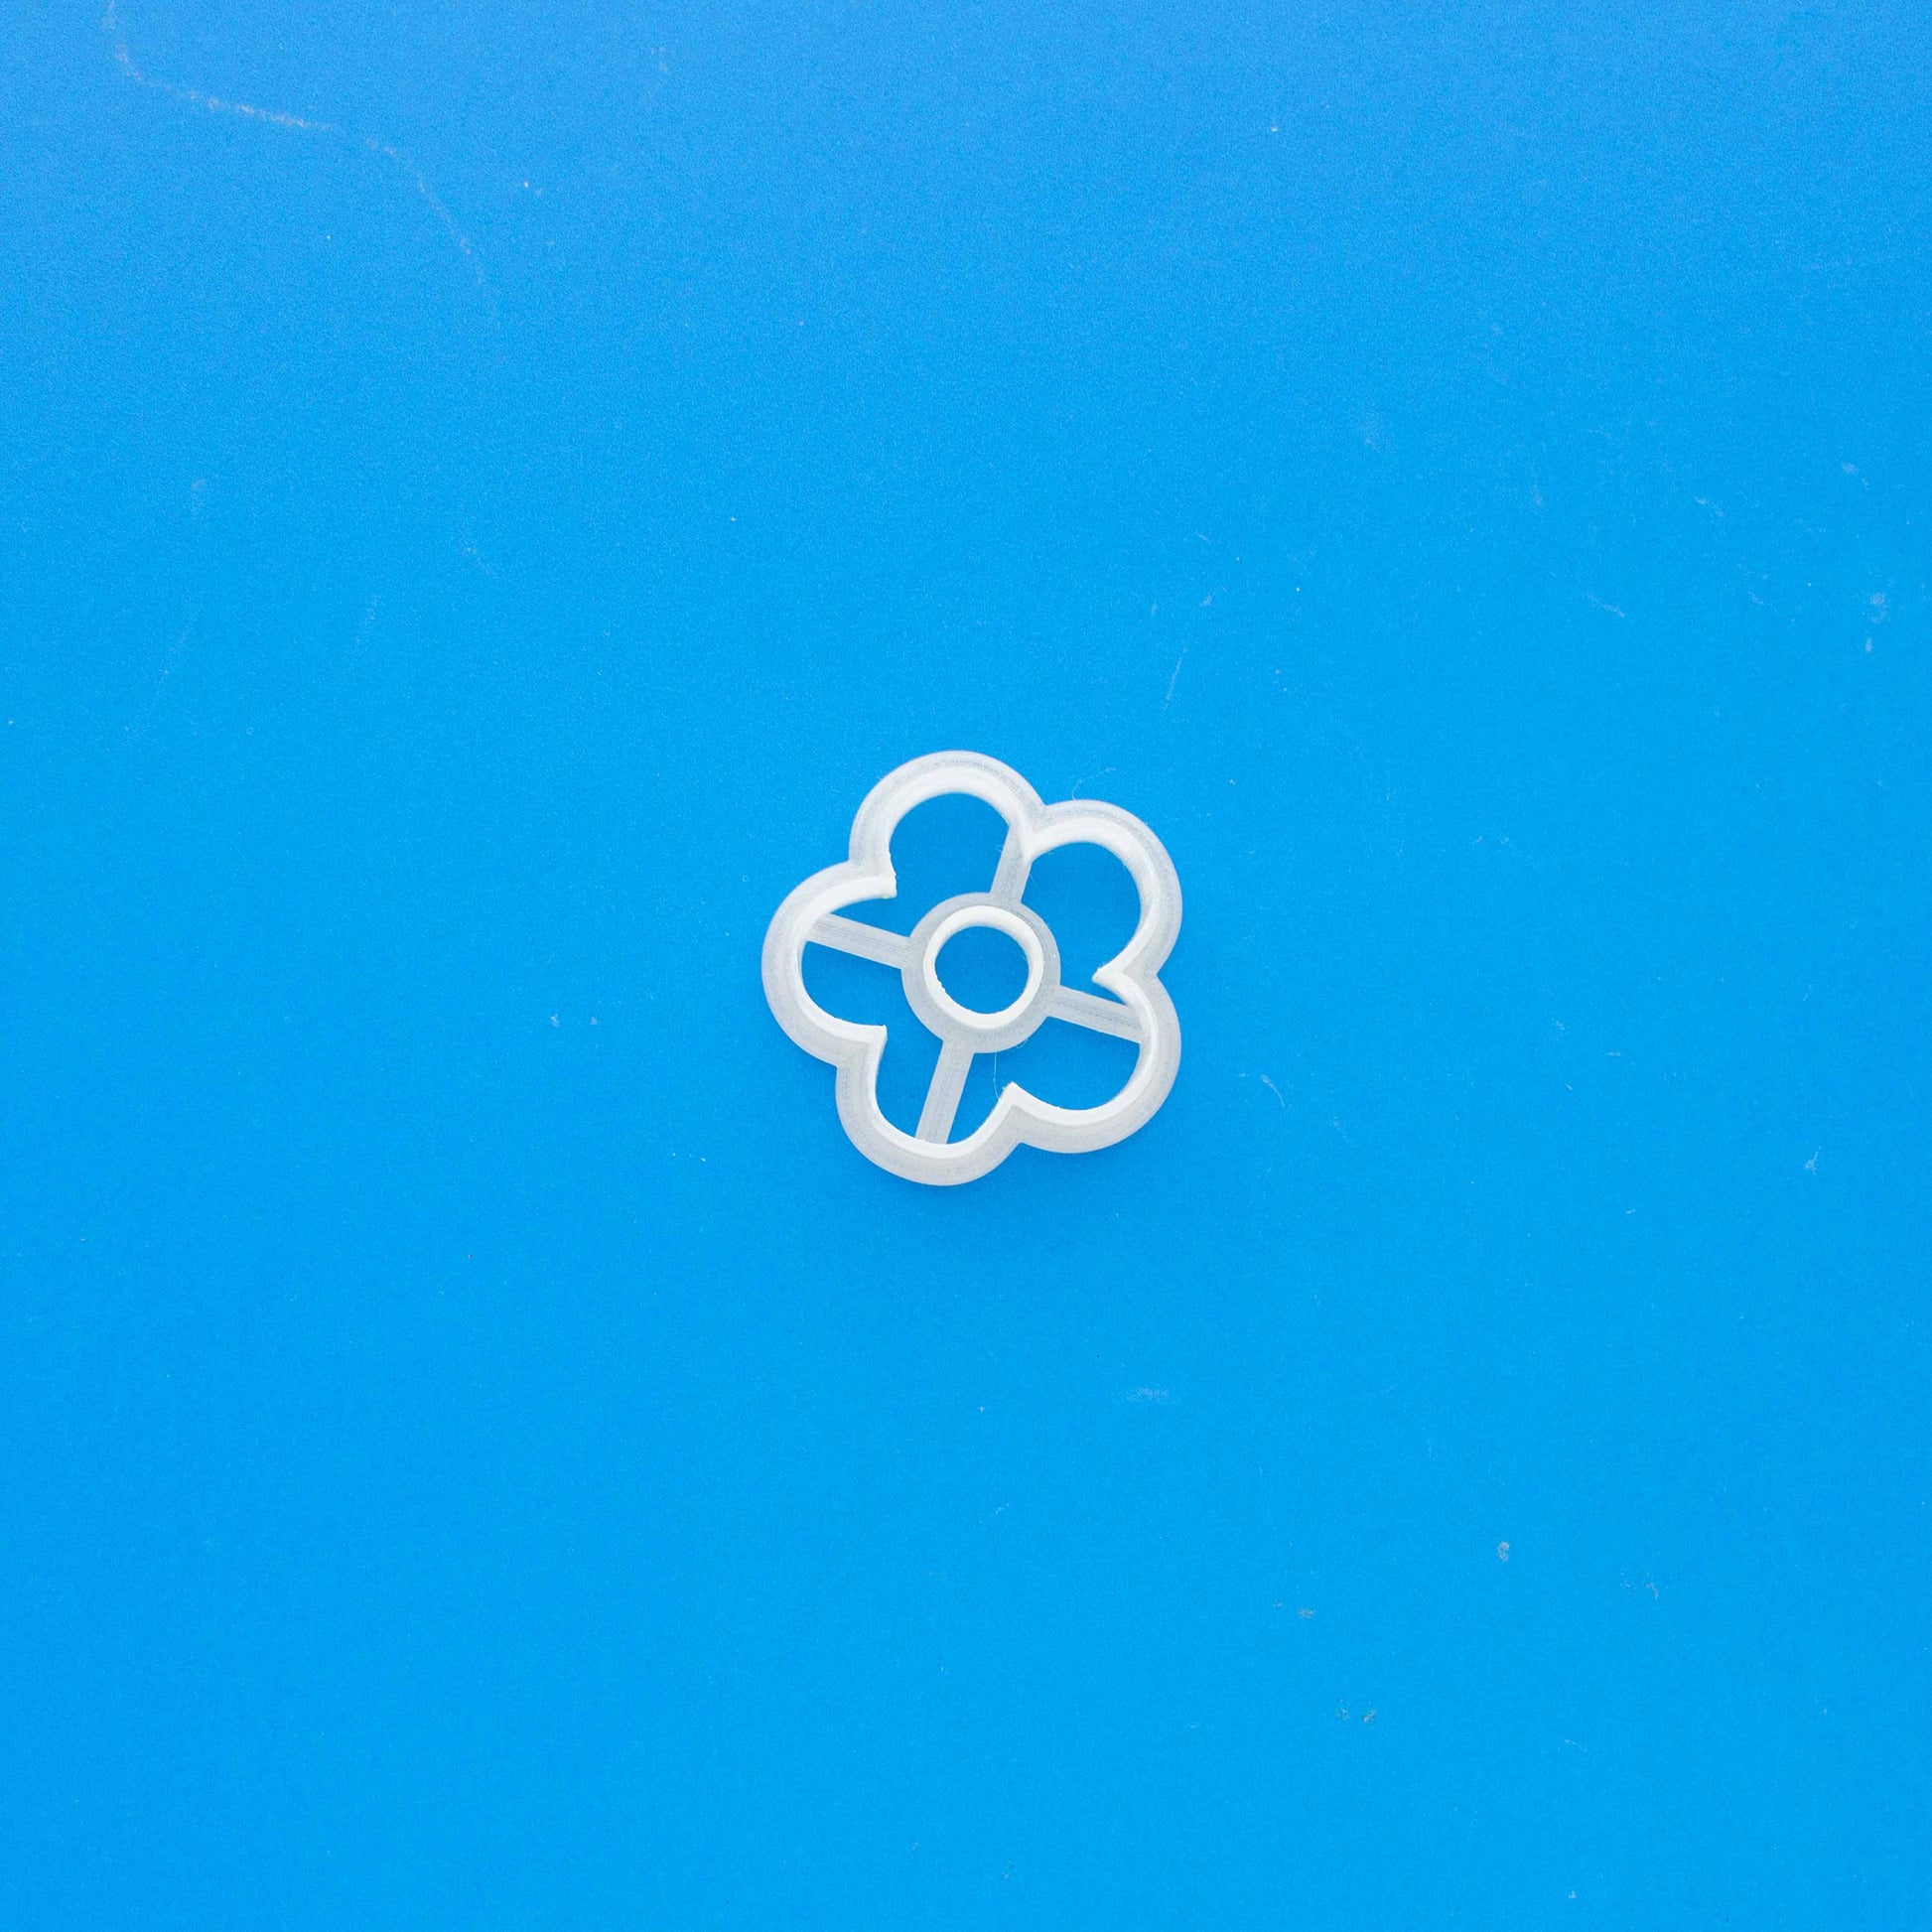 Daisy polymer clay cutter on a blue background